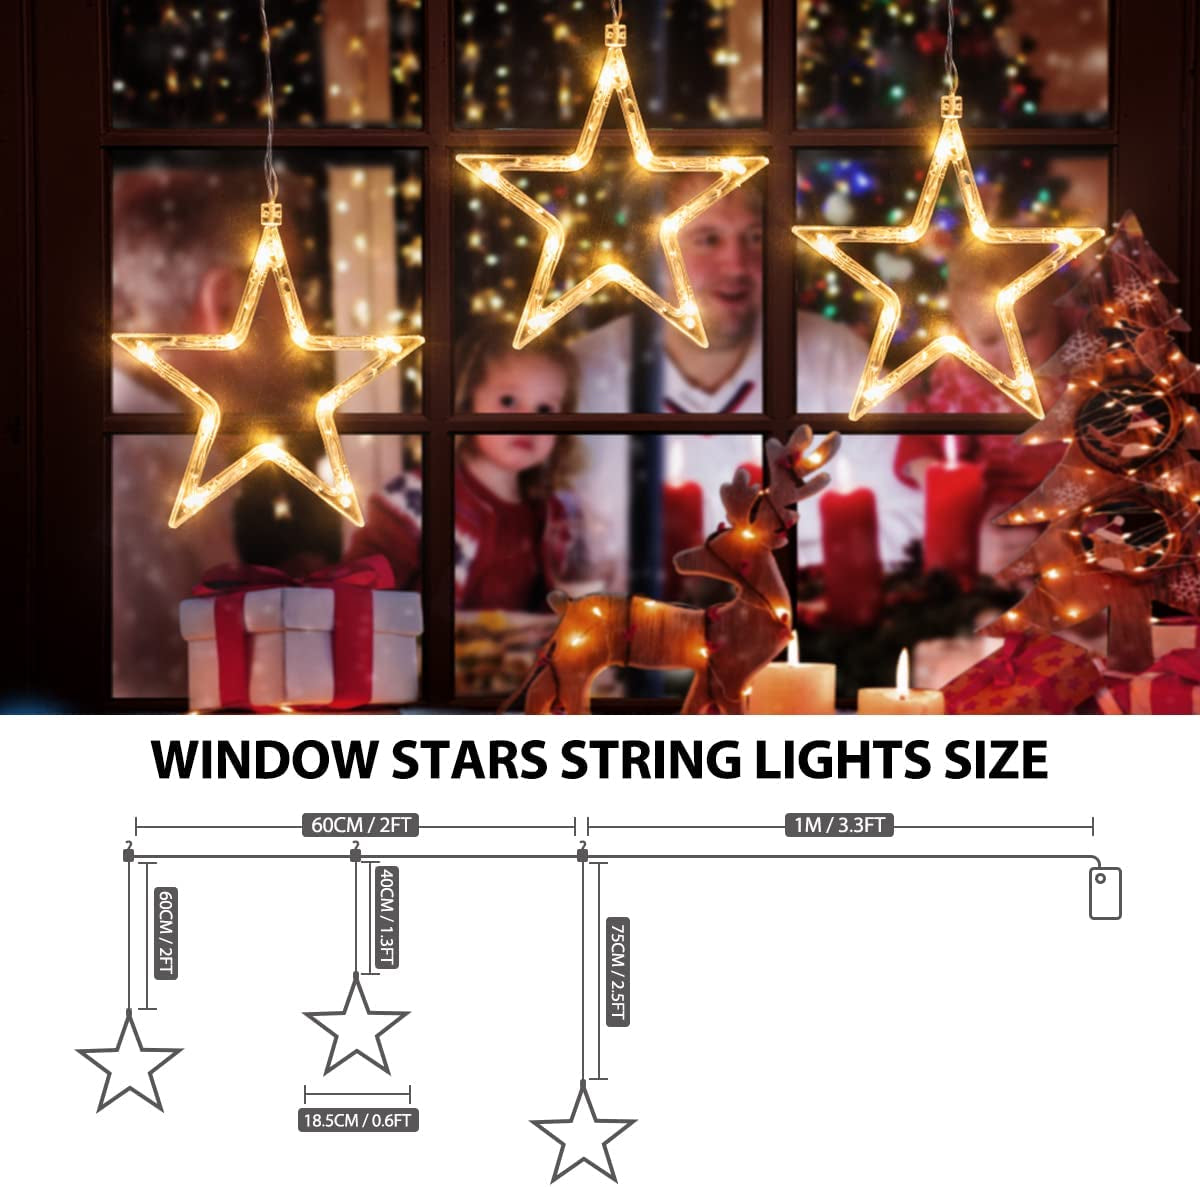 Chritmas Window Lights Indoor Outdoor, 3 Stars Lights 30 Leds Battery Operated Timer for Hanging 8 Modes Warm White Star String Lights, Xtmas Lights Decorative Light for Window, Door, Wall